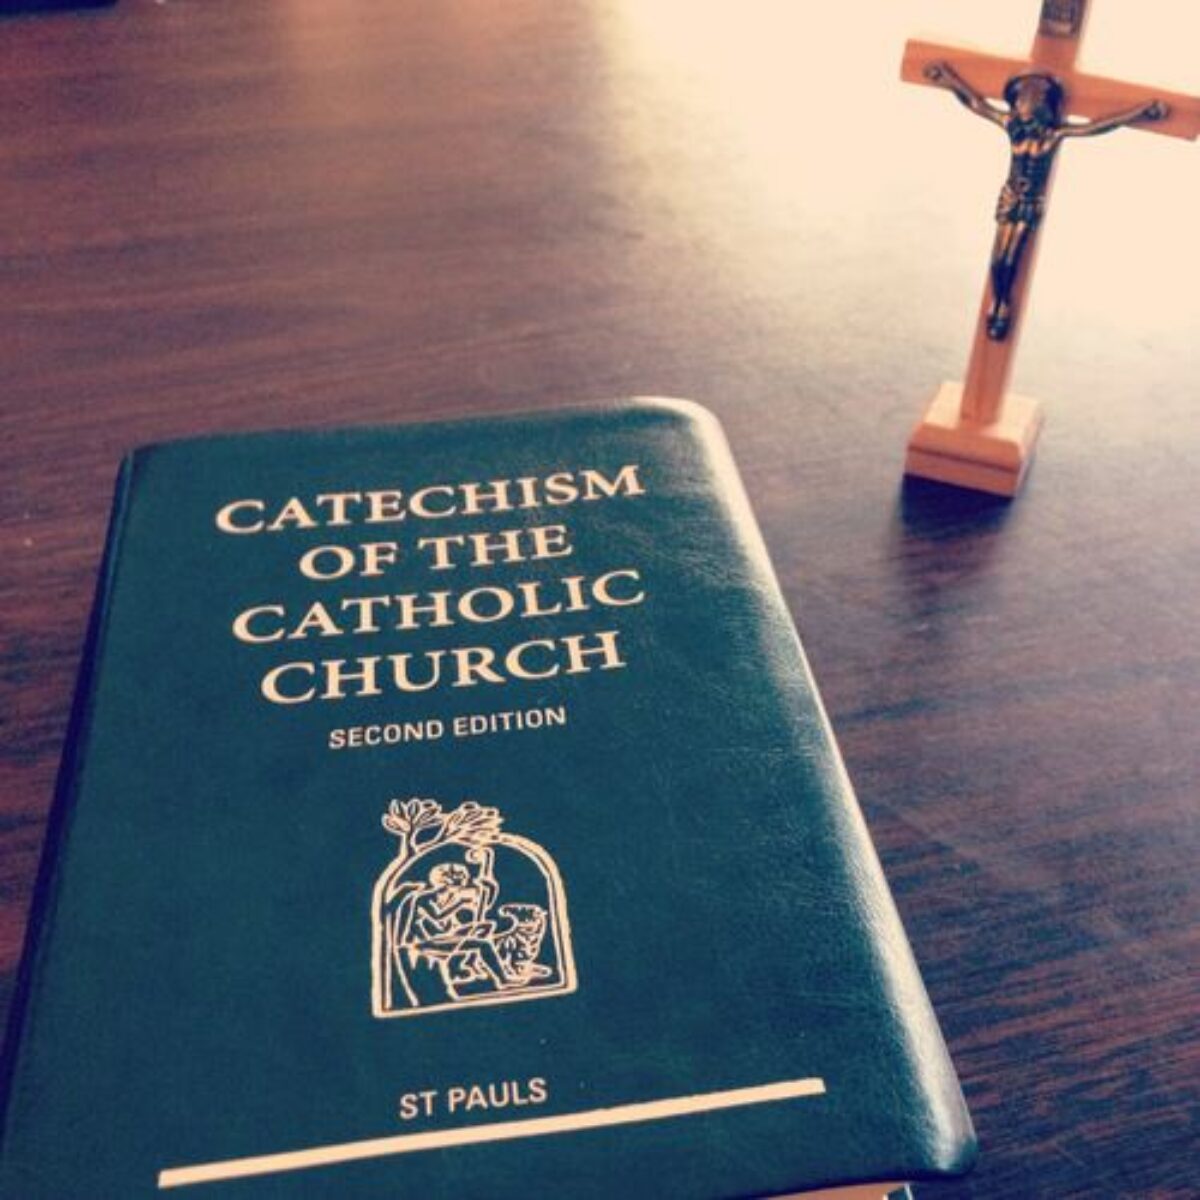 KNOW YOUR CATECHISM LITTLE BY LITTLE